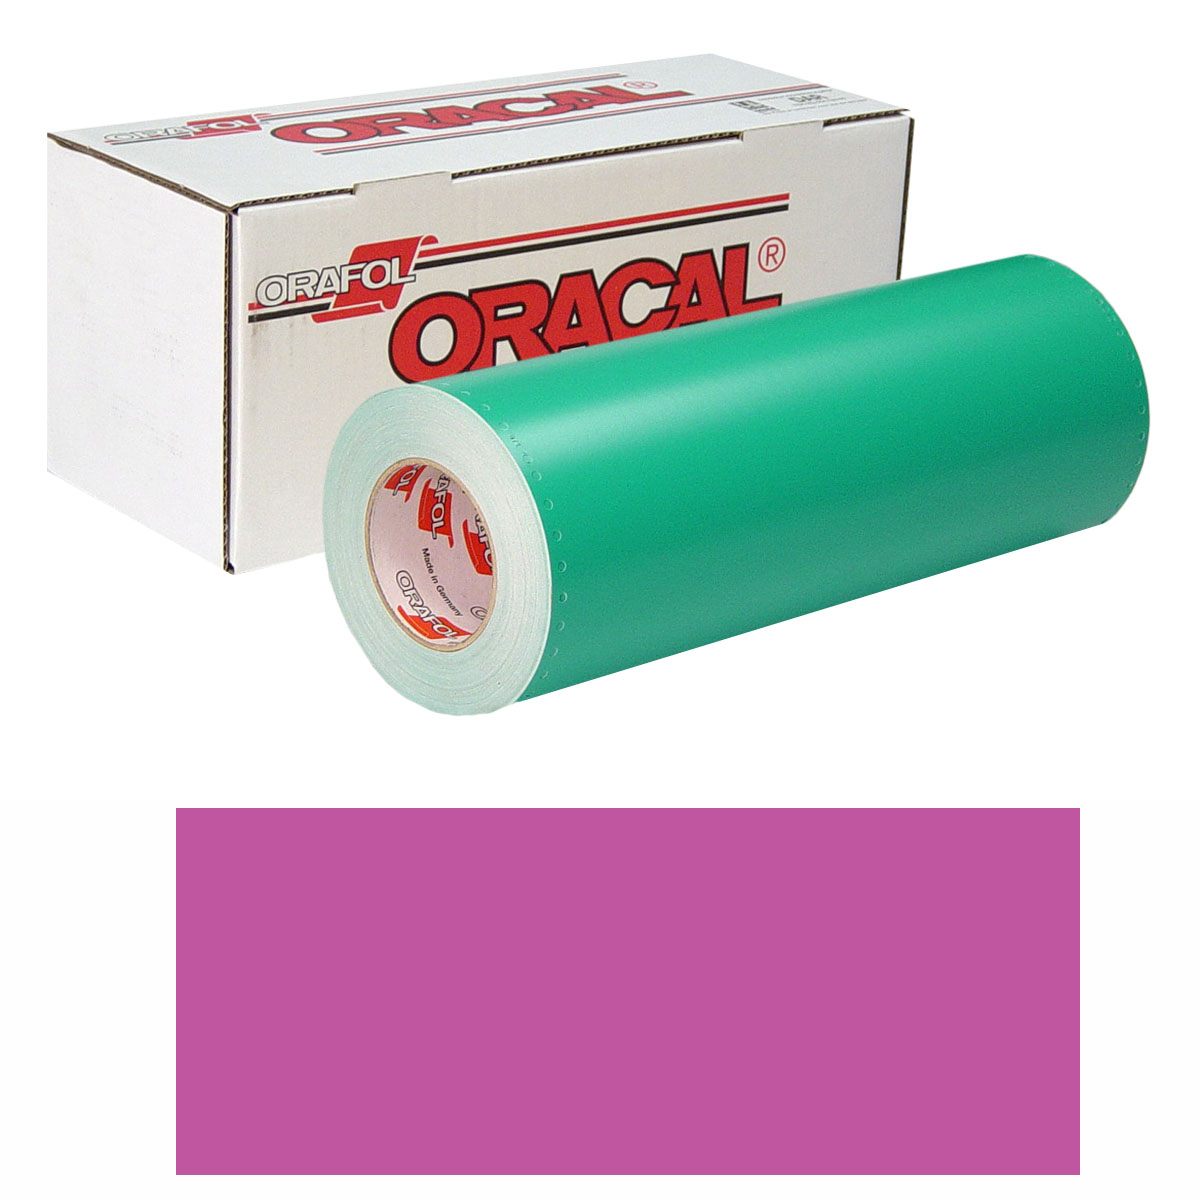 ORACAL 8500 15in X 10yd 413 Light Pink